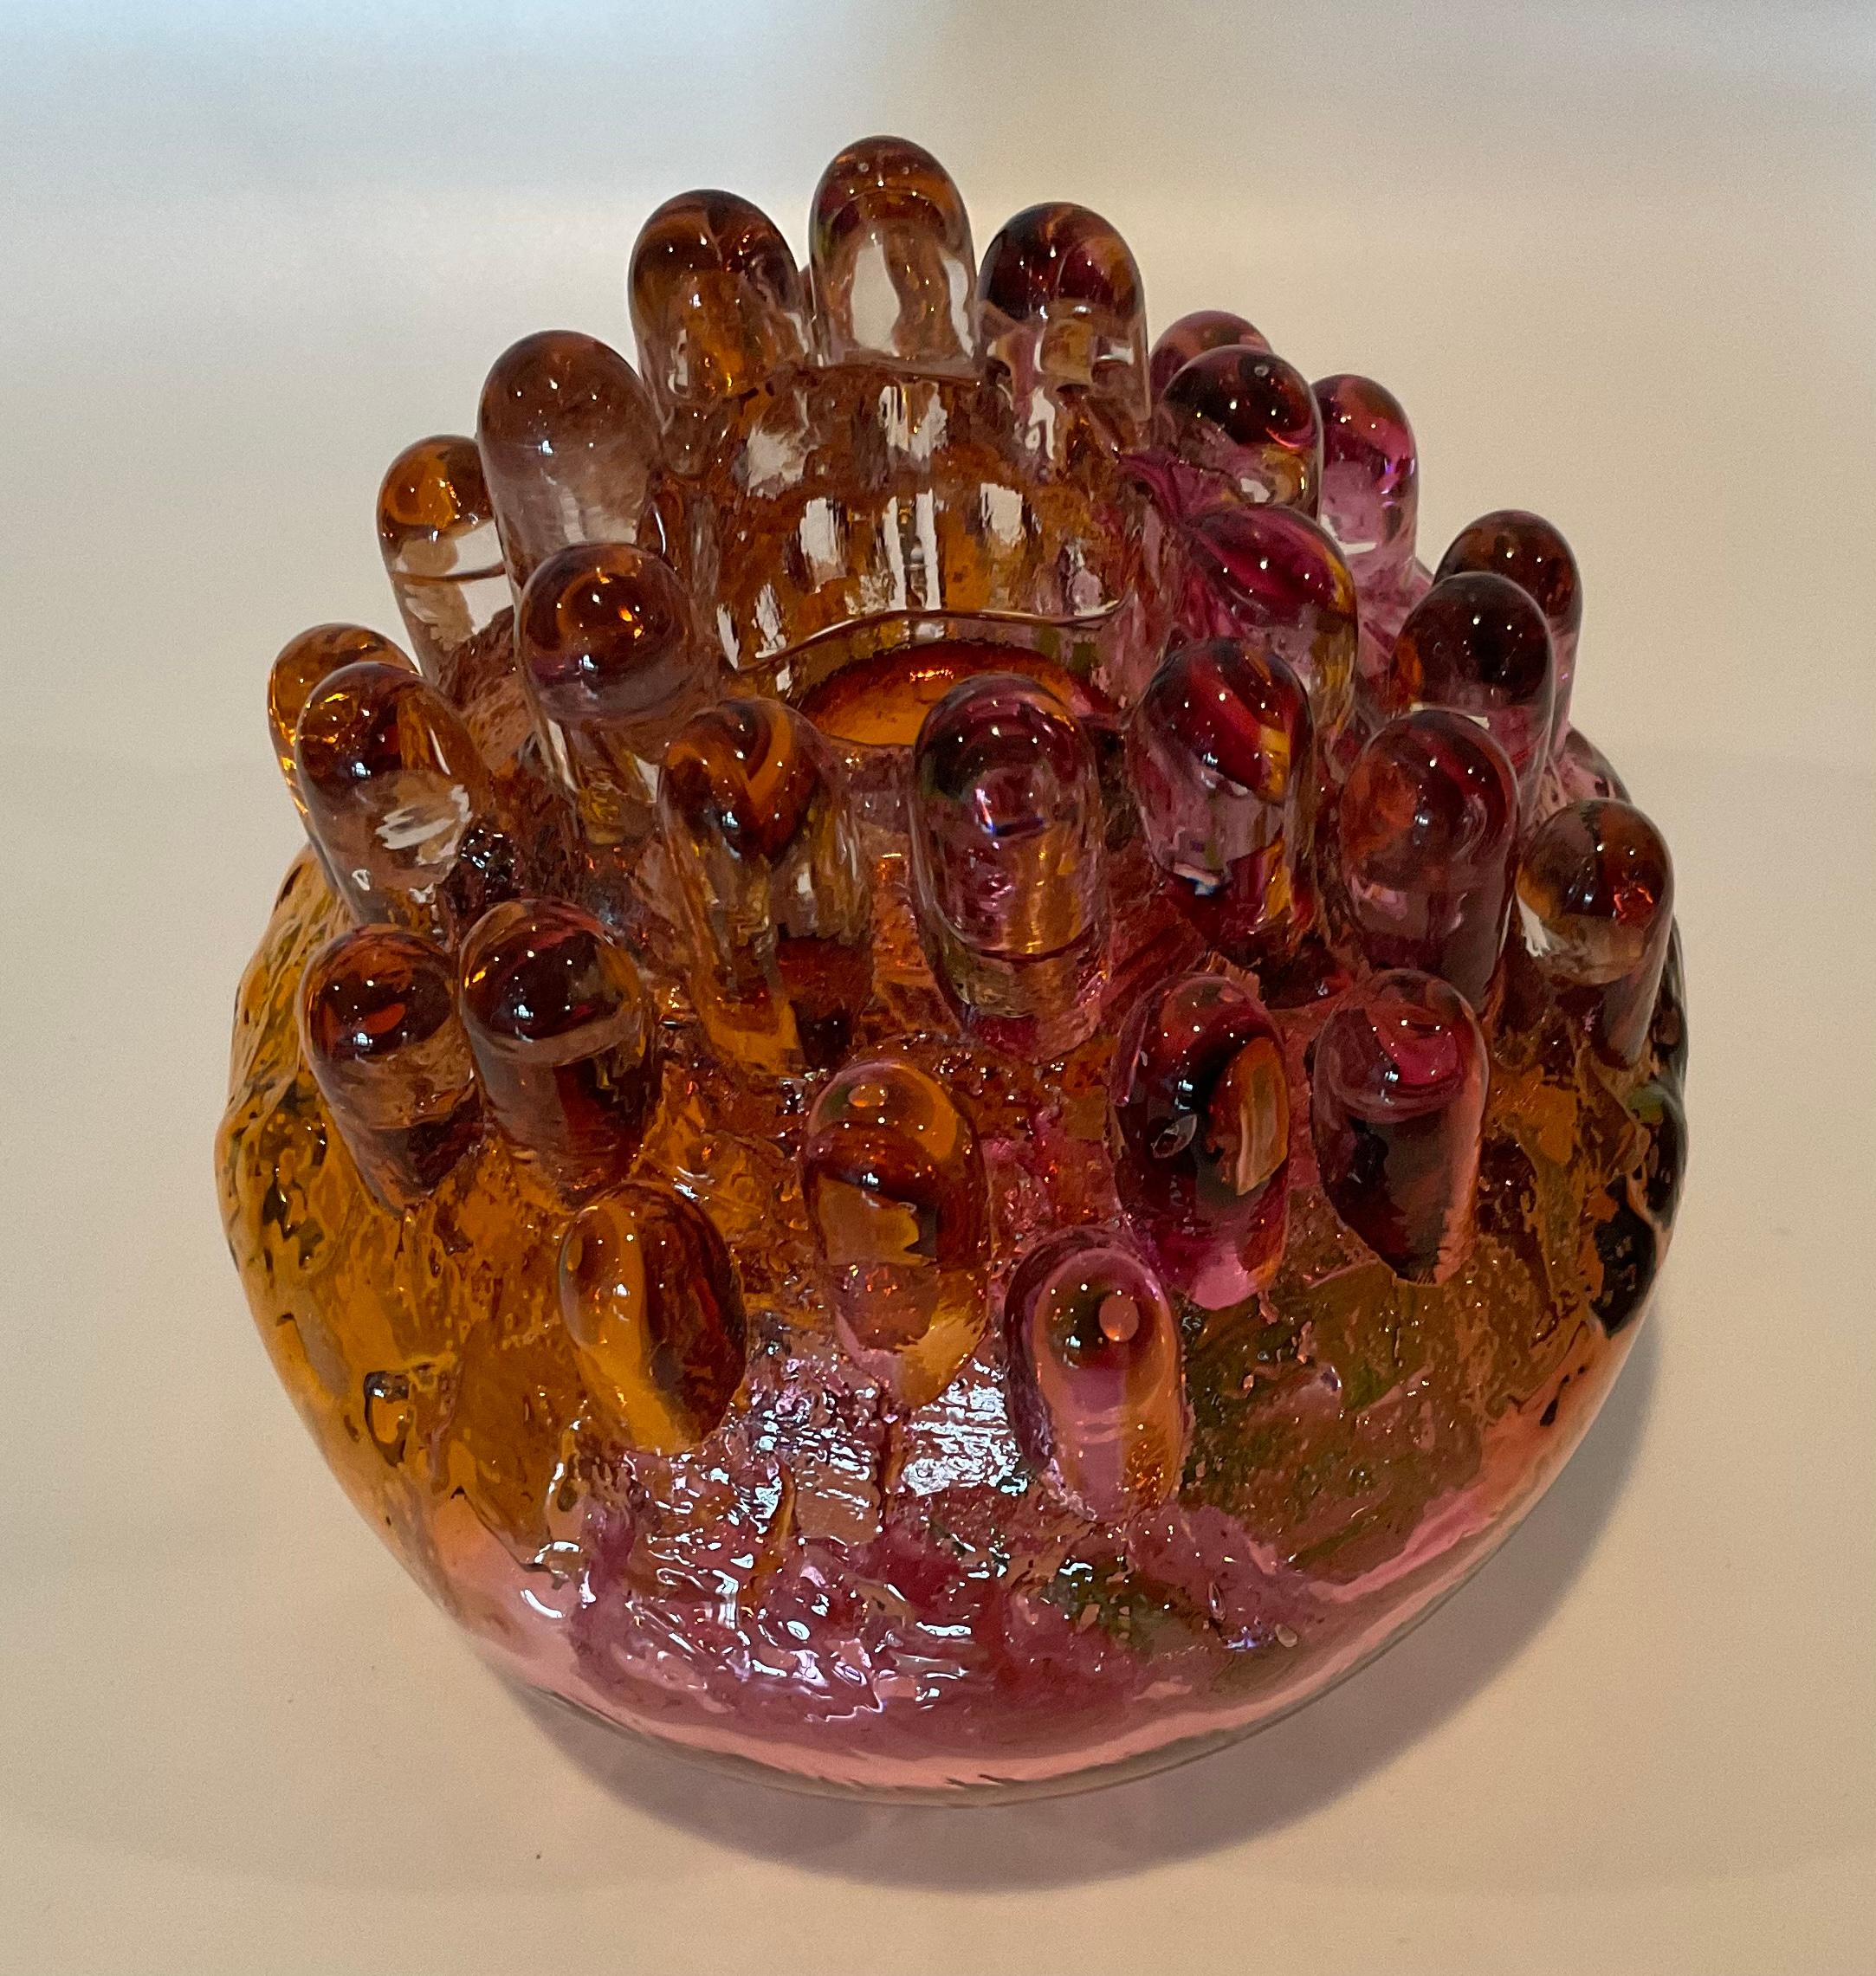 Goran Warff Kosta Sweden Unique Signed Art Glass Candle holder in very vibrant colors. Signed as pictured.